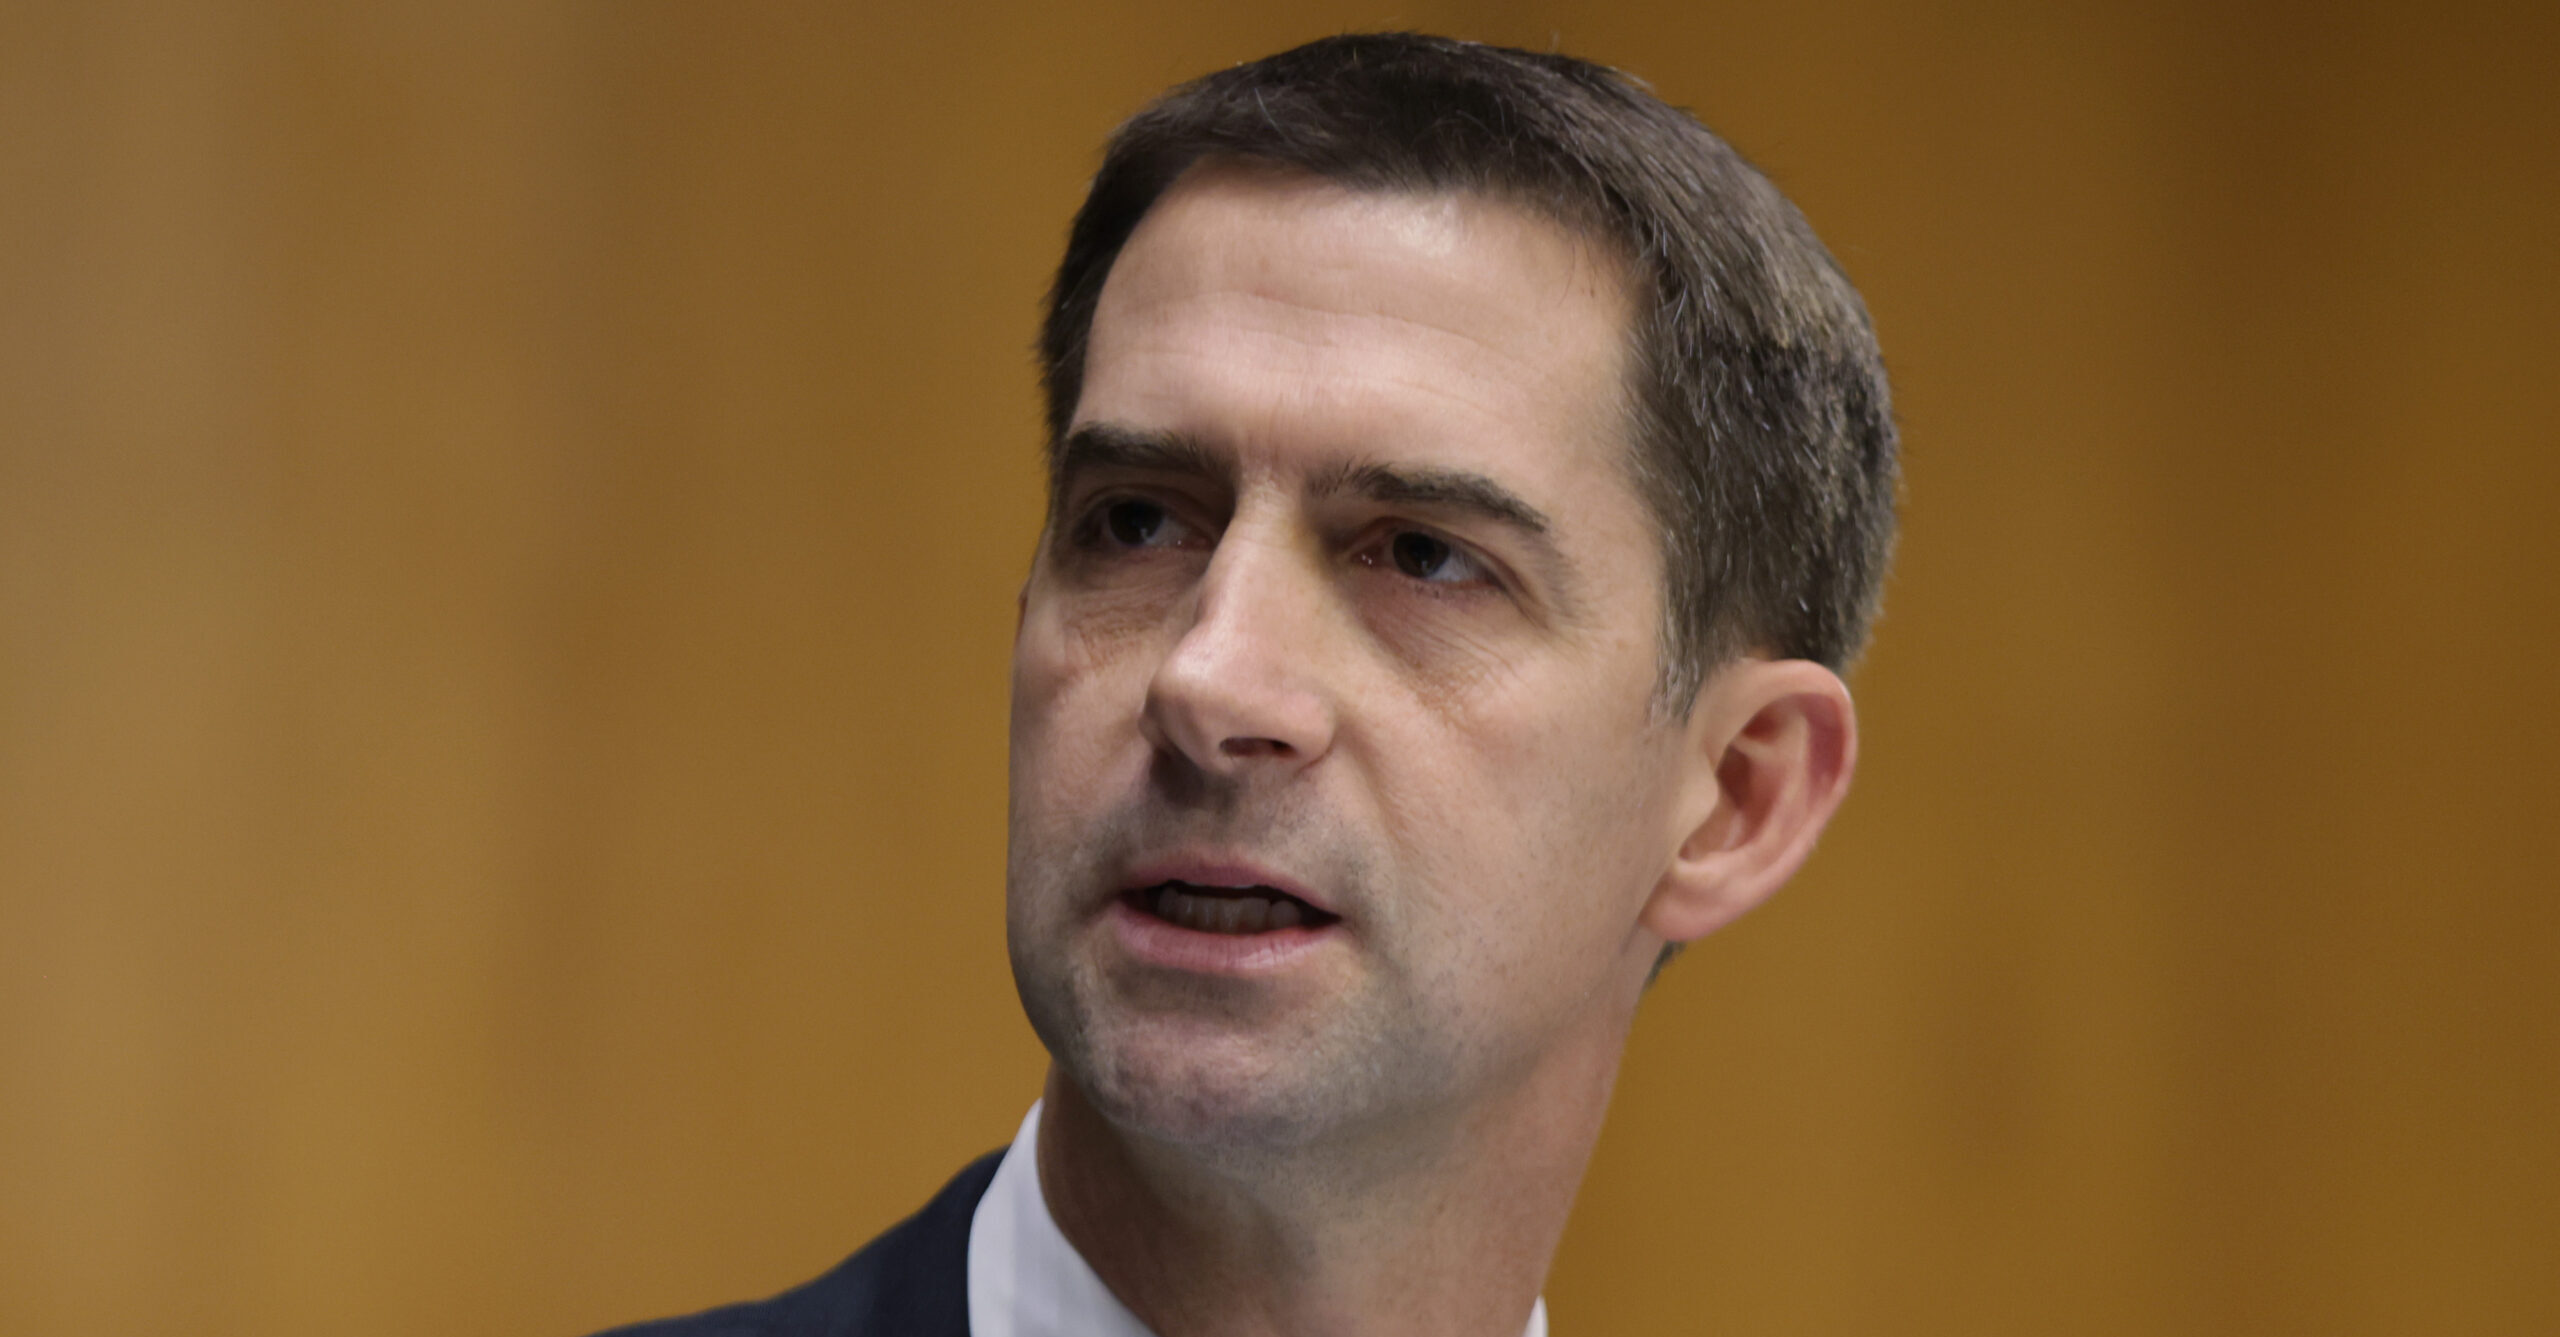 ‘A Scam to Rig Elections’: Tom Cotton Attacks Ranked-Choice Voting After Sarah Palin Loses to a Democrat (mediaite.com)